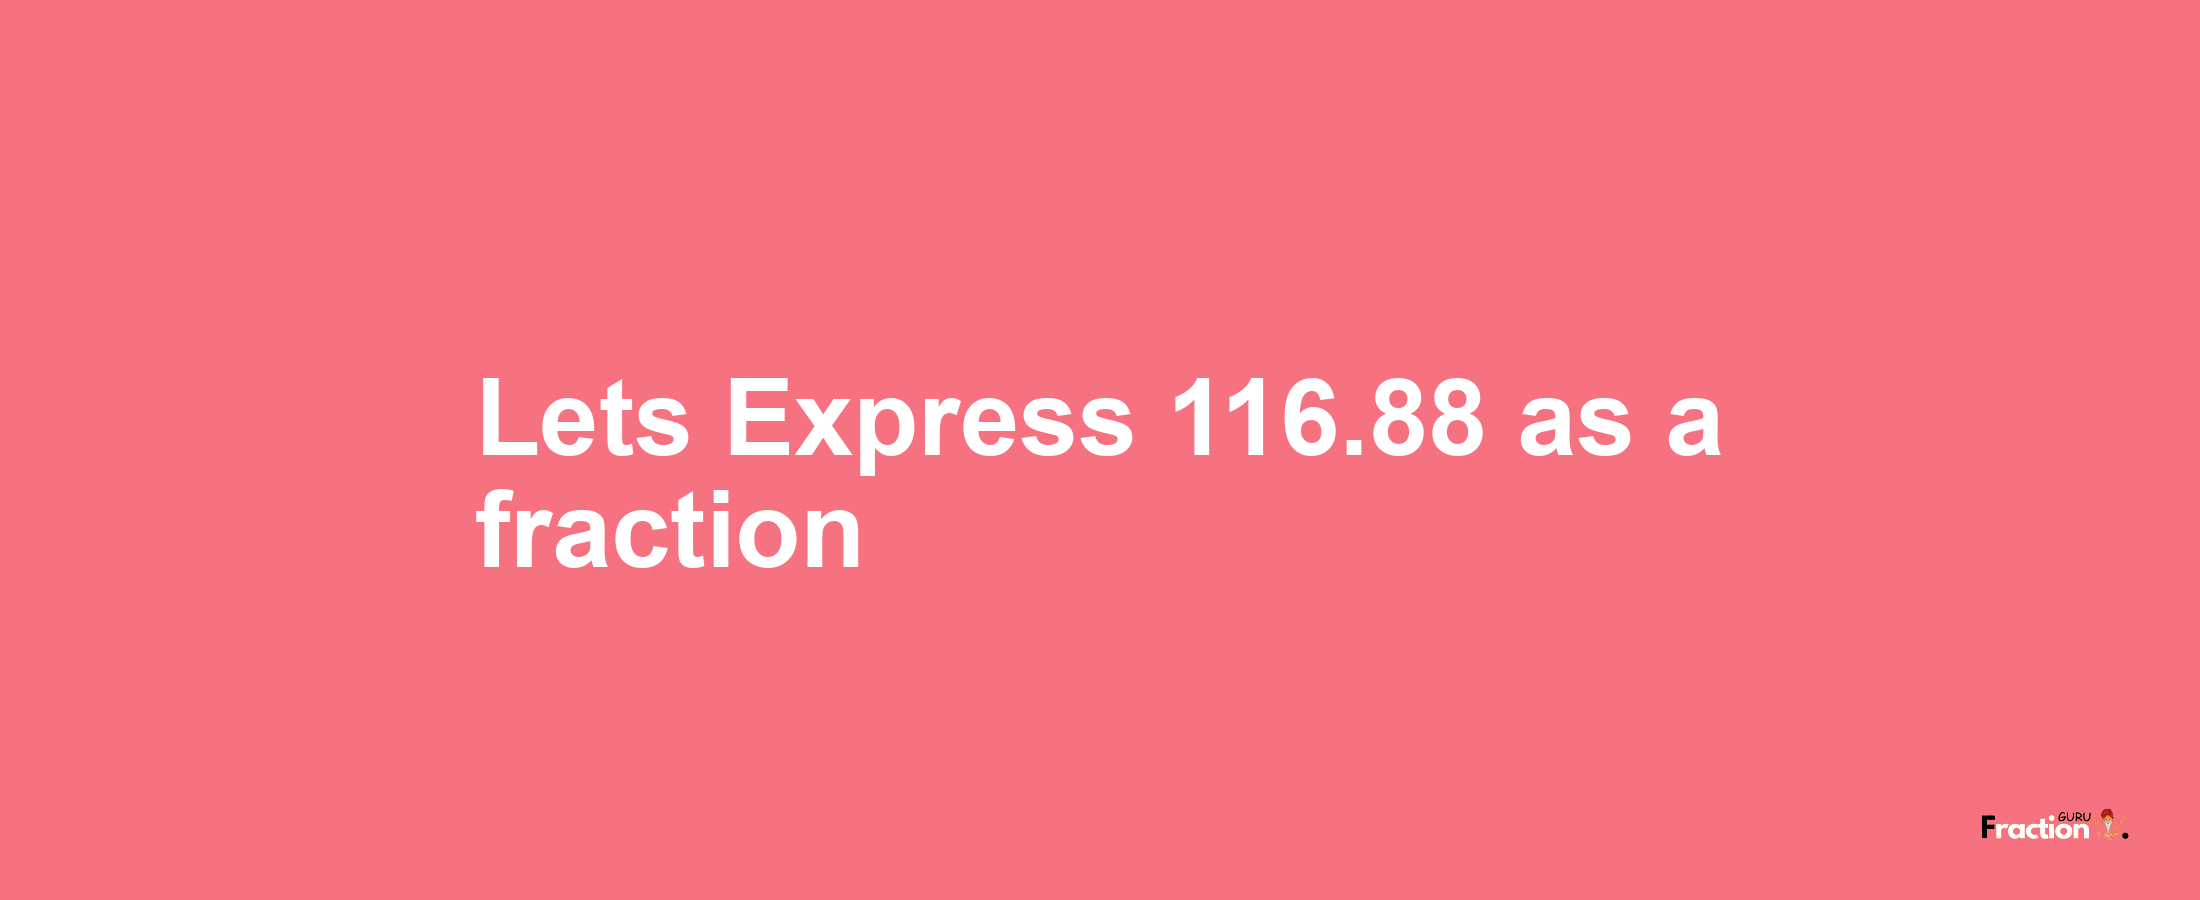 Lets Express 116.88 as afraction